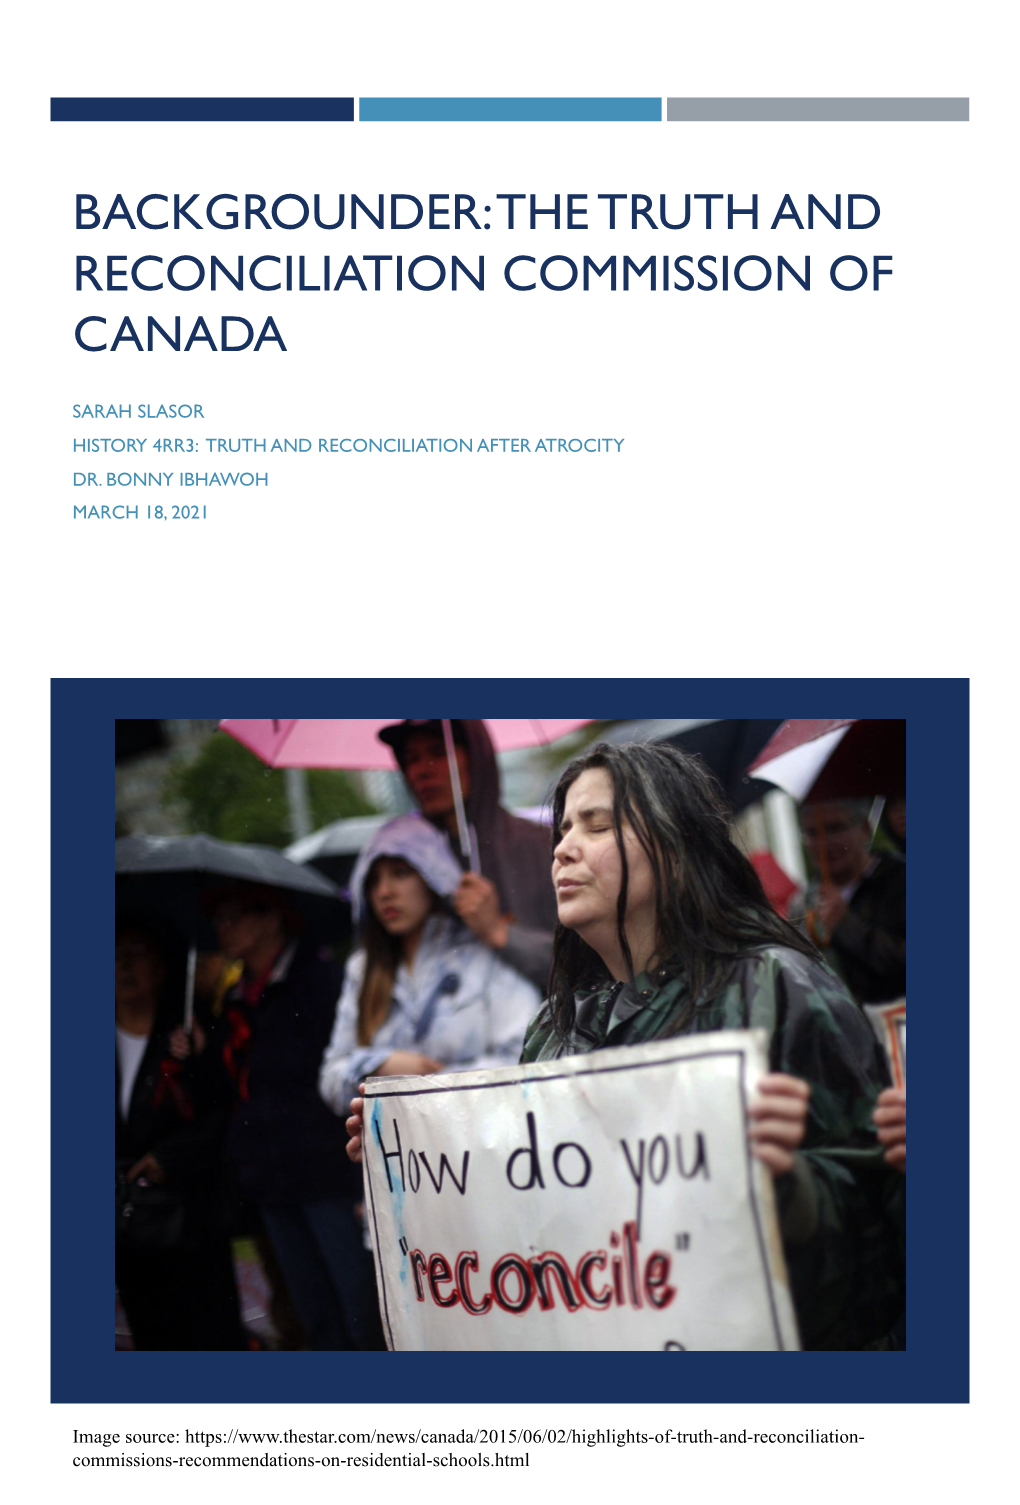 The Truth and Reconciliation Commission of Canada